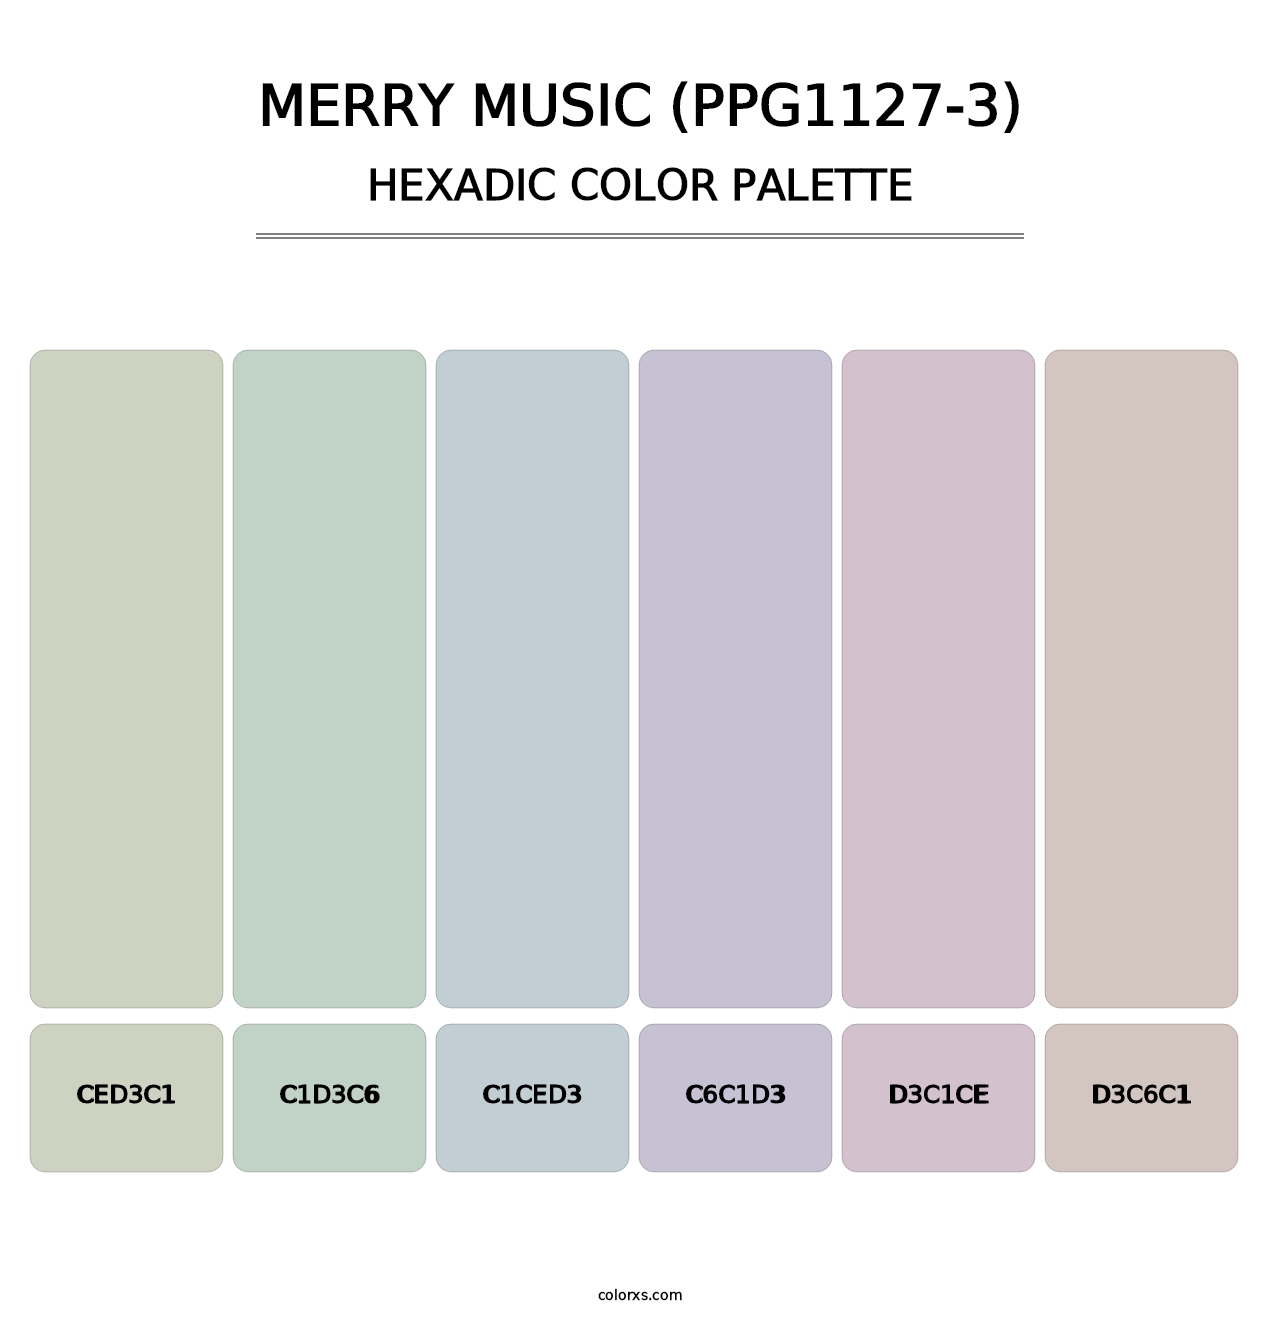 Merry Music (PPG1127-3) - Hexadic Color Palette